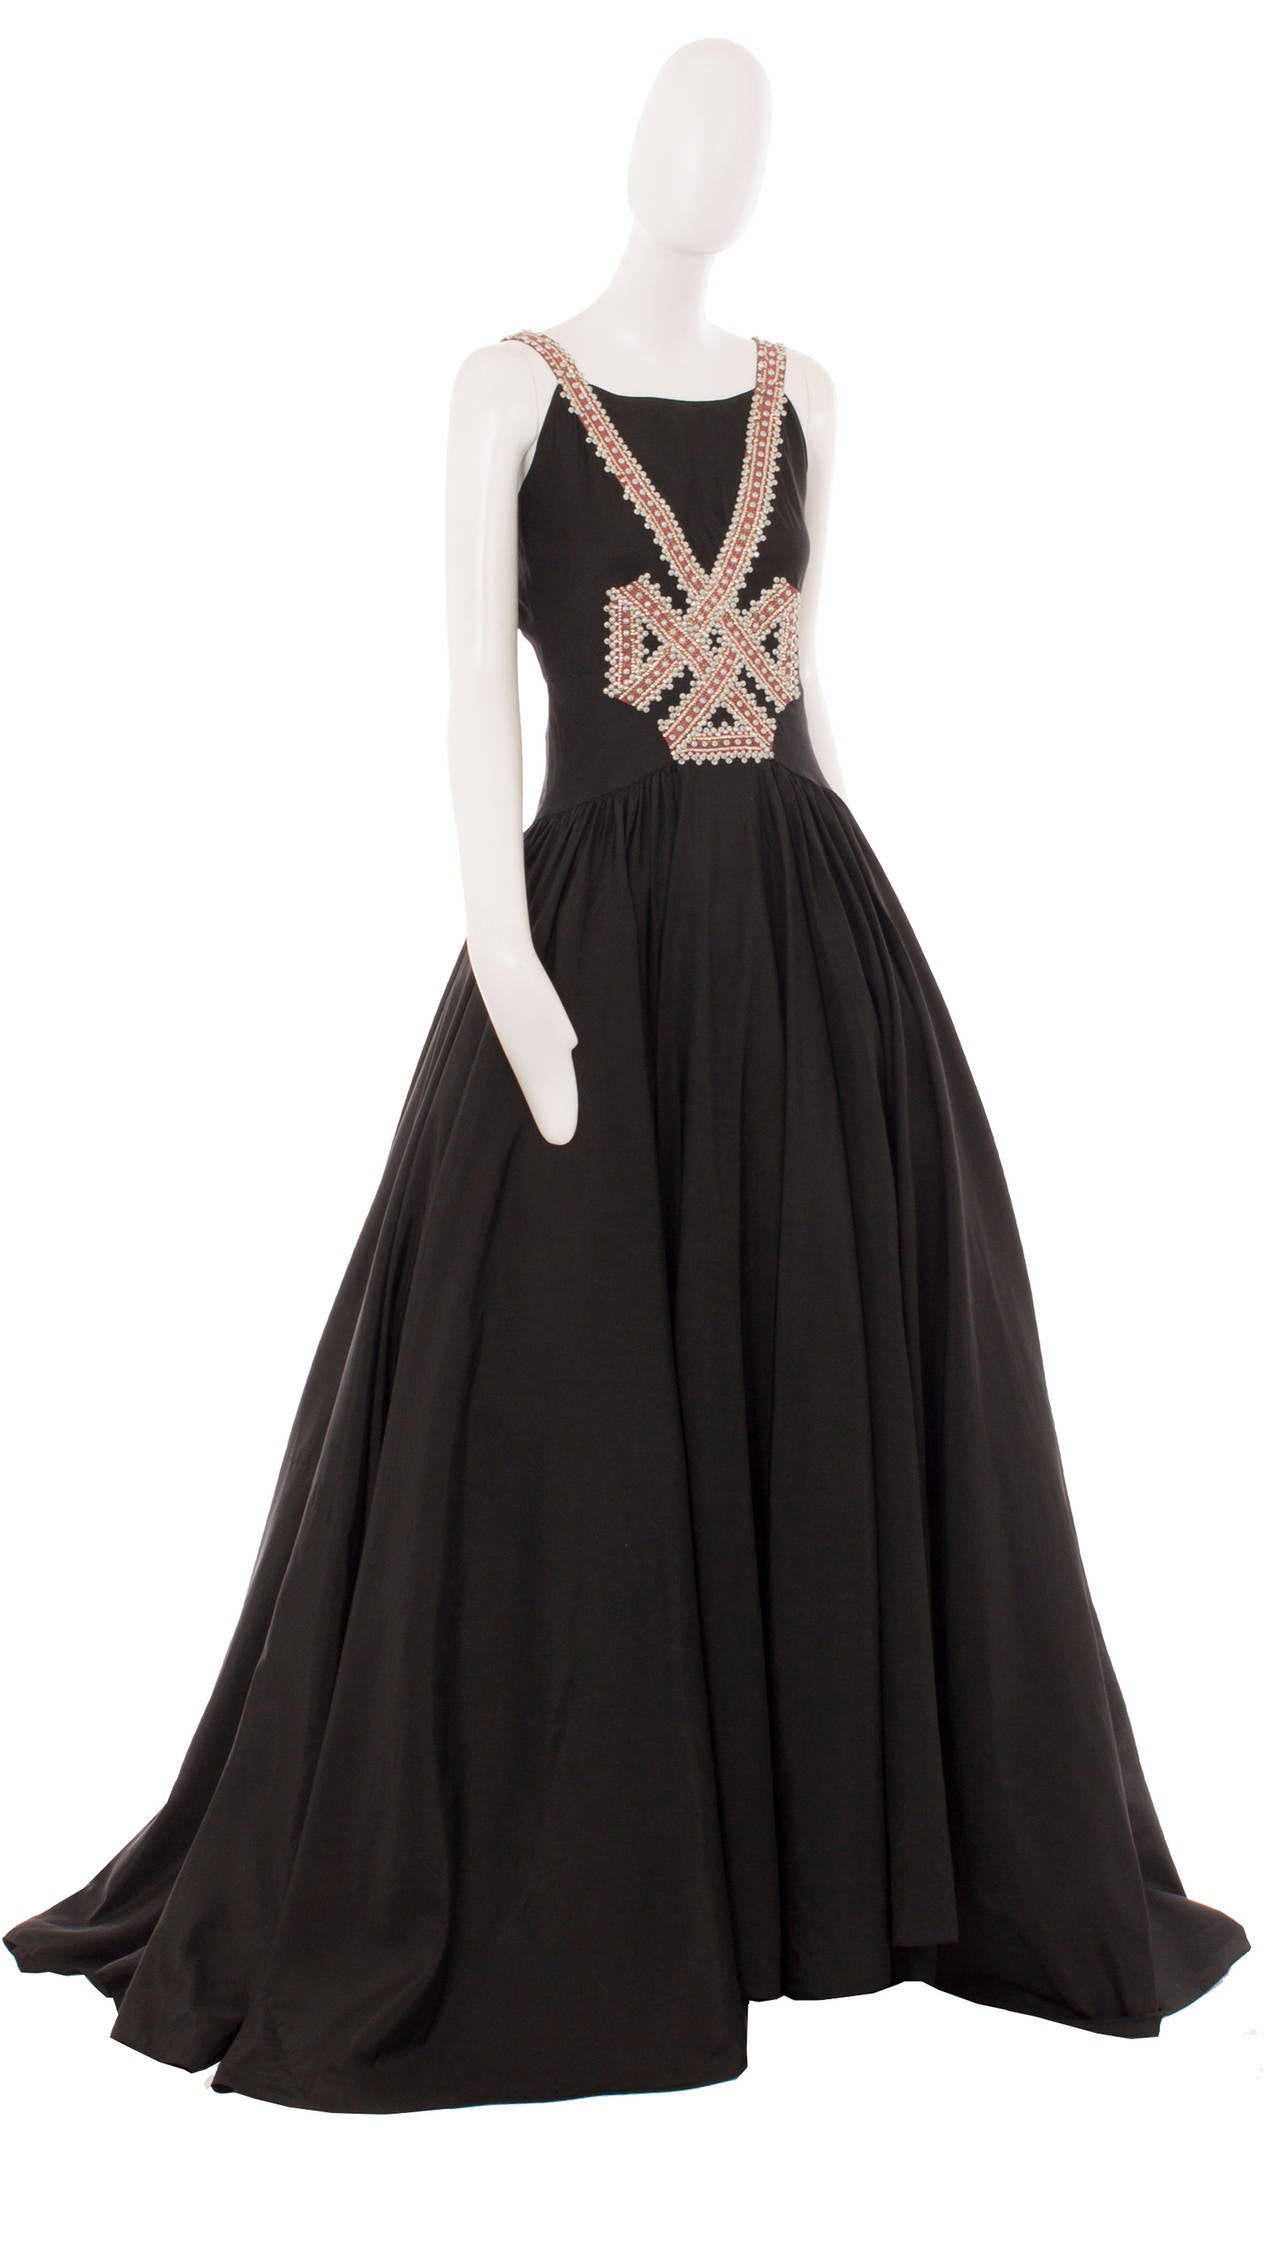 A simply stunning piece of haute couture by Lanvin, this black taffeta gown is the ultimate in red carpet or black tie dressing. The pink grosgrain ribbon detailing, embellished with hundreds of baby blue beads and gold sequins, creates a bow motif